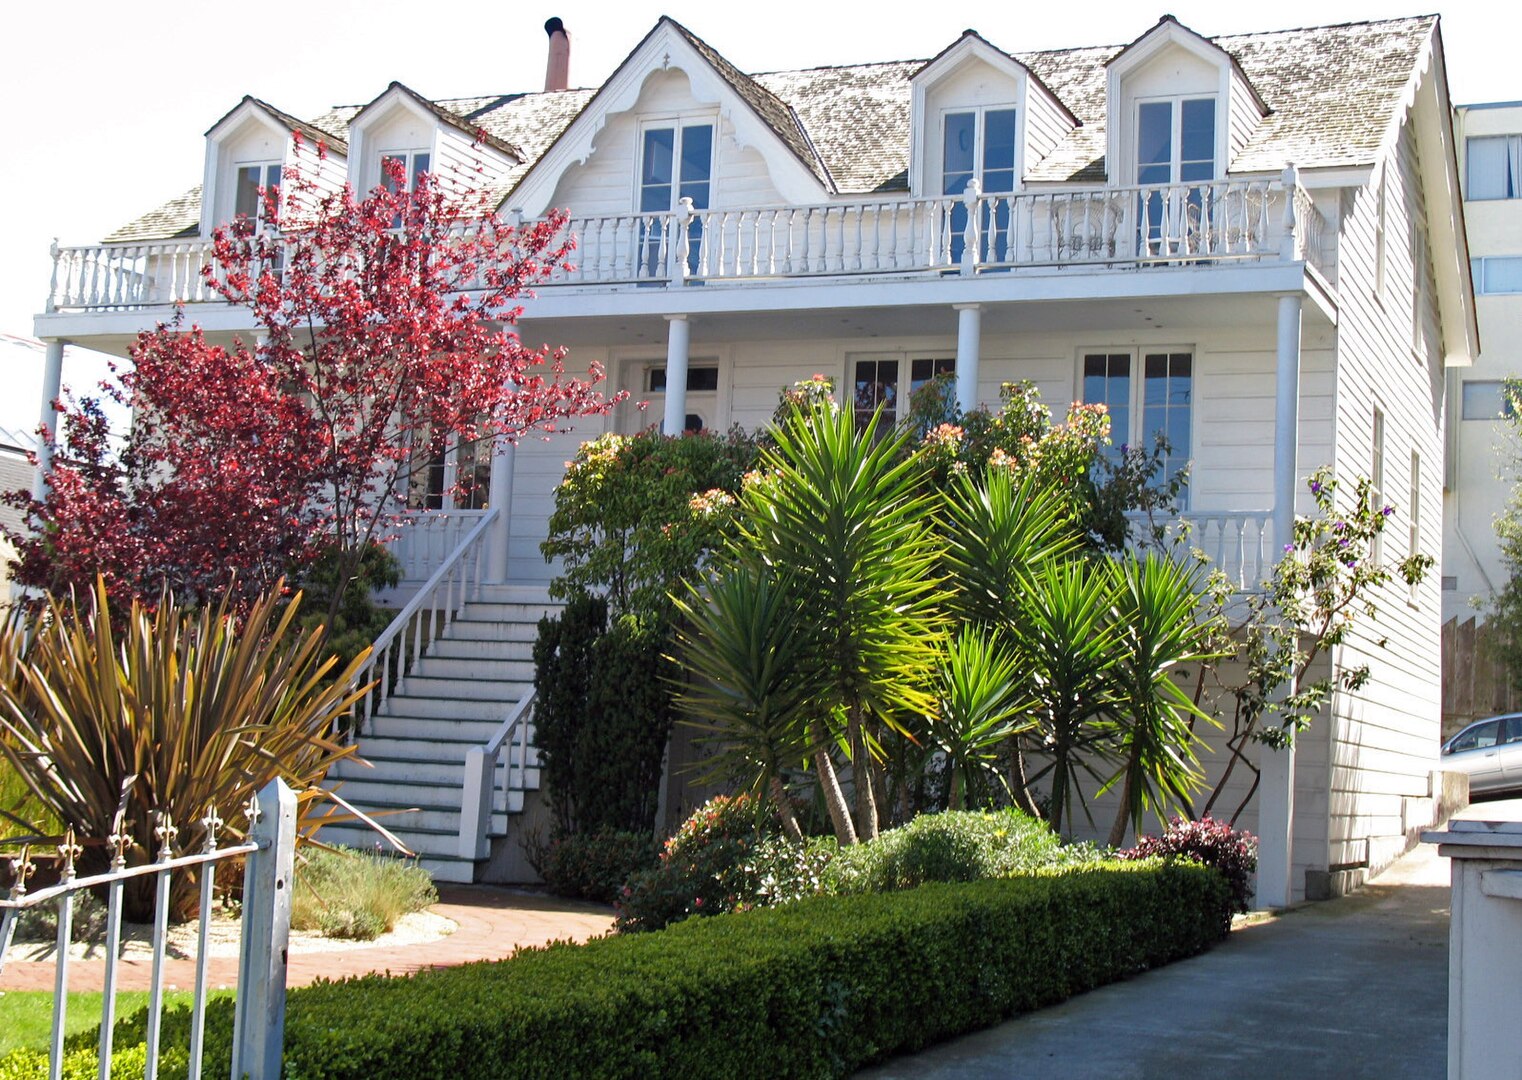 the oldest house in San Francisco, a large white house with a porch.